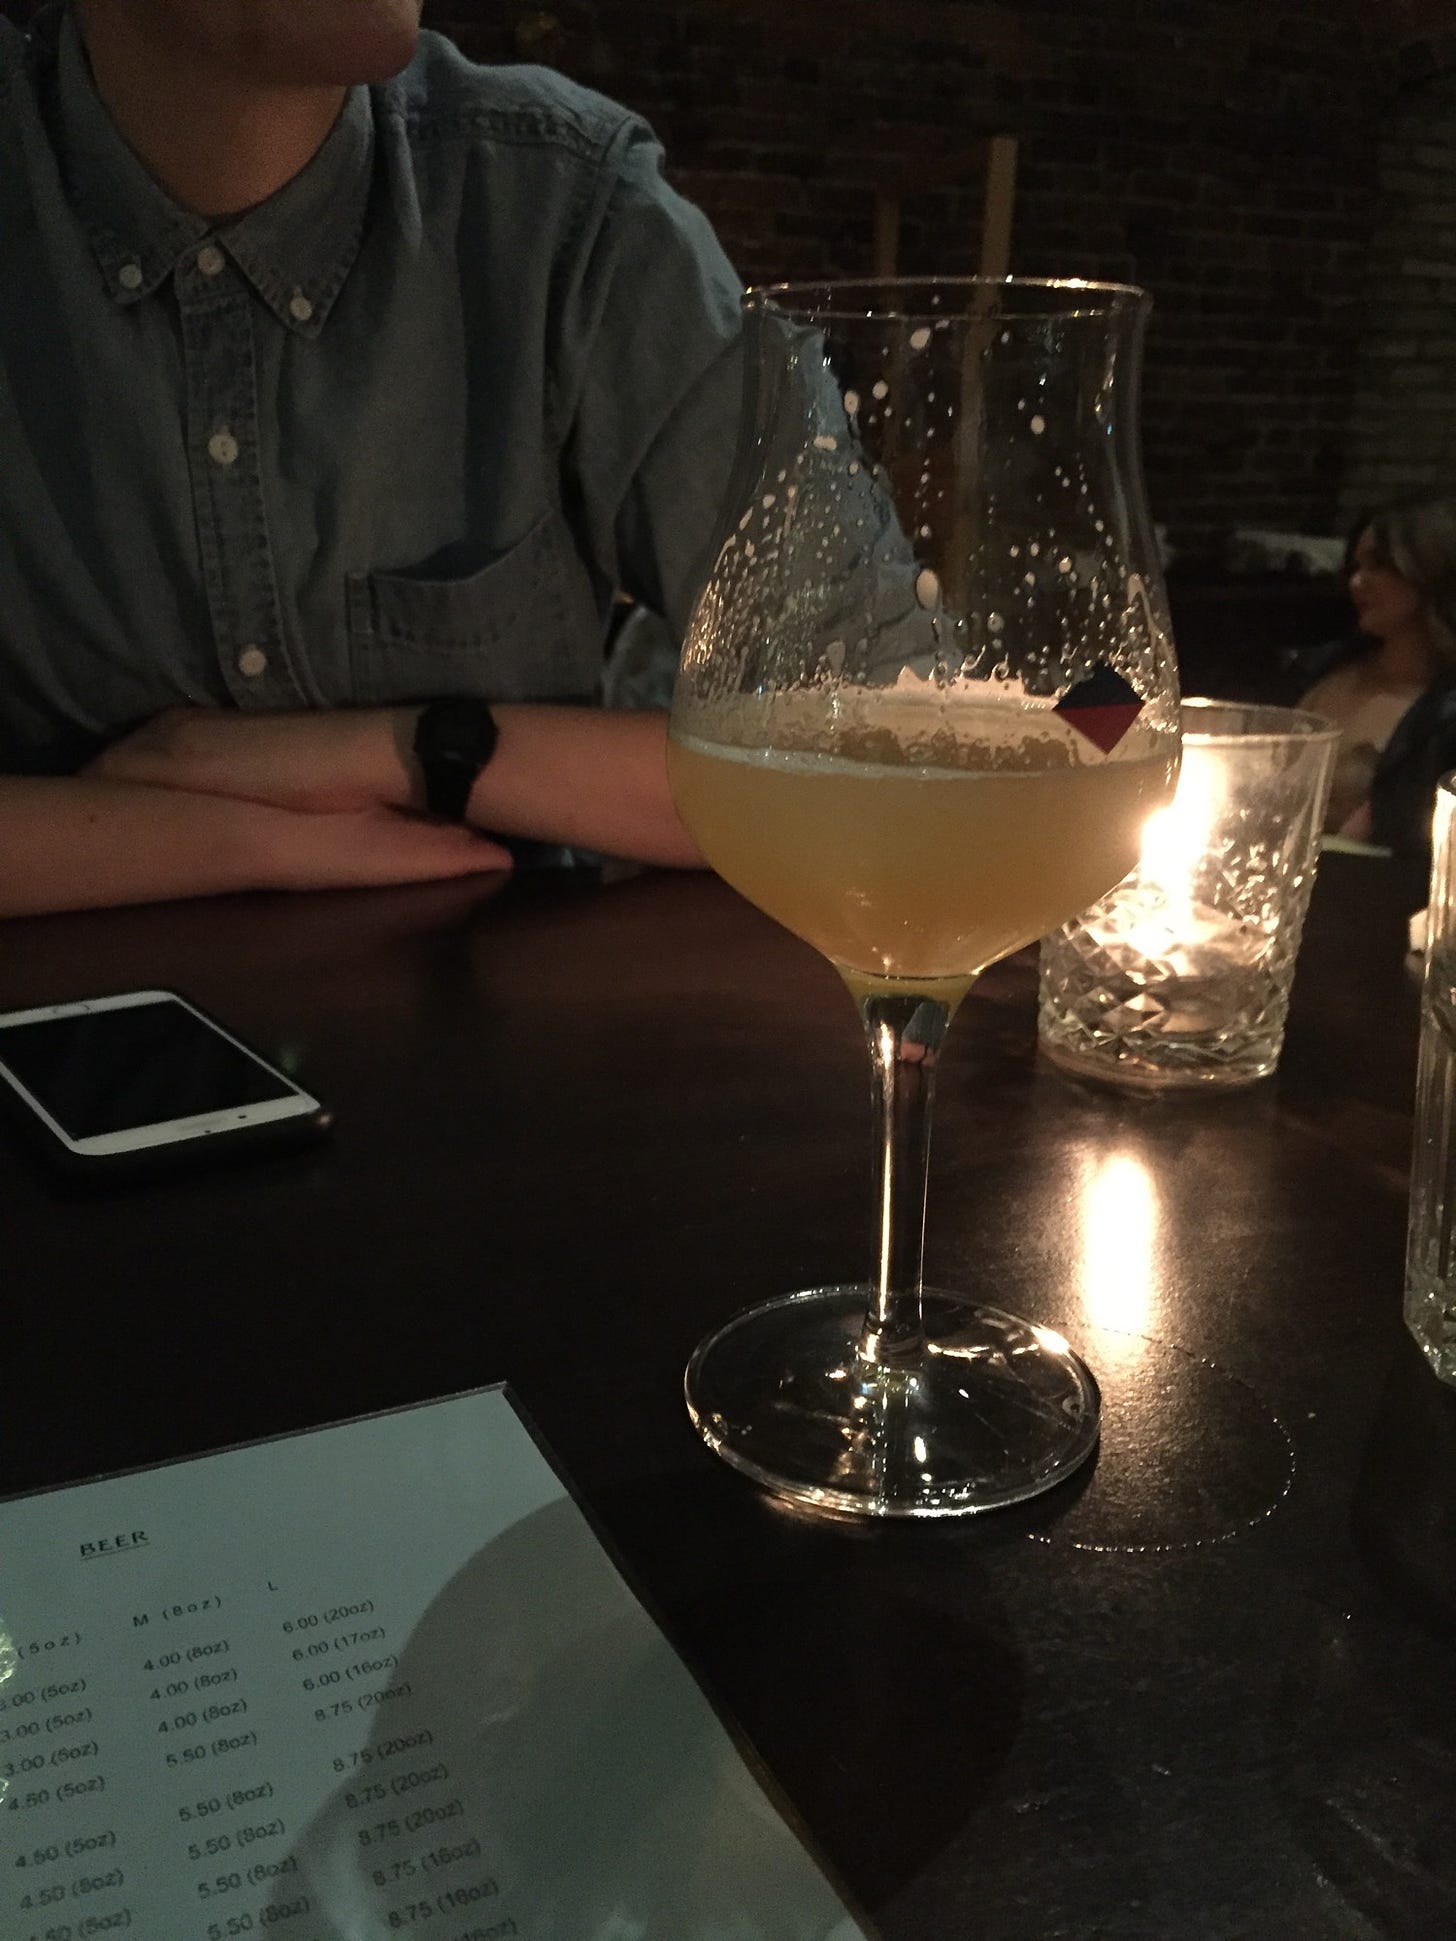 At a dark pub table lit by a candle, a bell-shaped glass of pale beer sits next to a beer list. In the background, there is an iphone on the table and a person in a button-up shirt whose face is not visible.